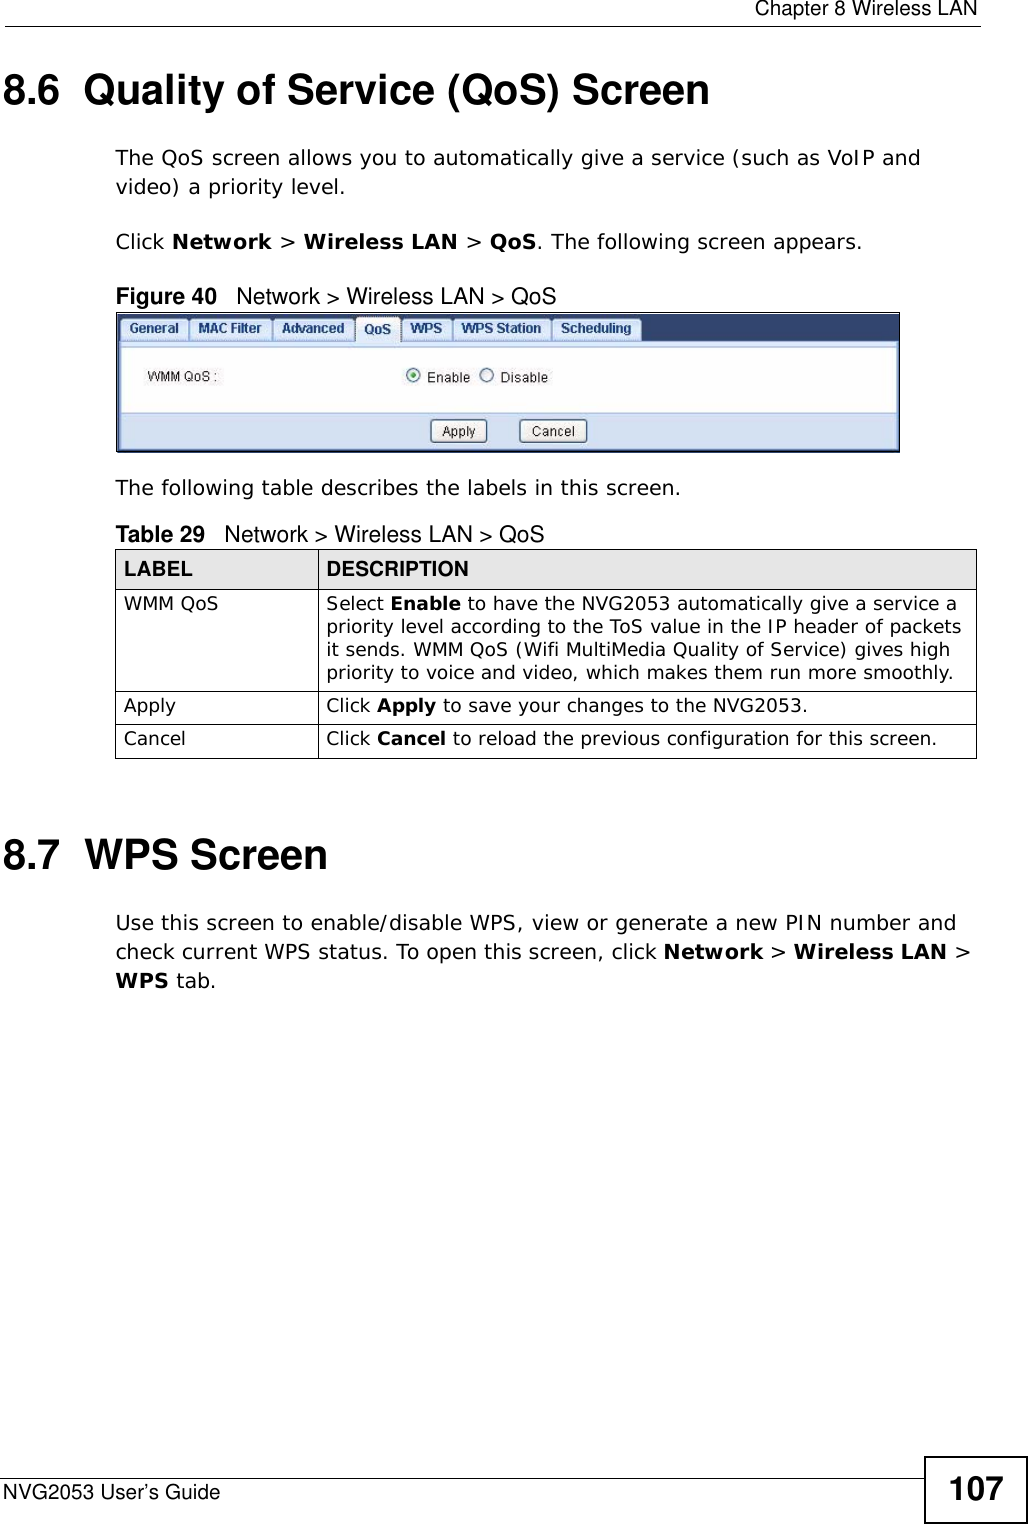  Chapter 8 Wireless LANNVG2053 User’s Guide 1078.6  Quality of Service (QoS) ScreenThe QoS screen allows you to automatically give a service (such as VoIP and video) a priority level.Click Network &gt; Wireless LAN &gt; QoS. The following screen appears.Figure 40   Network &gt; Wireless LAN &gt; QoS The following table describes the labels in this screen. 8.7  WPS ScreenUse this screen to enable/disable WPS, view or generate a new PIN number and check current WPS status. To open this screen, click Network &gt; Wireless LAN &gt; WPS tab.Table 29   Network &gt; Wireless LAN &gt; QoSLABEL DESCRIPTIONWMM QoS Select Enable to have the NVG2053 automatically give a service a priority level according to the ToS value in the IP header of packets it sends. WMM QoS (Wifi MultiMedia Quality of Service) gives high priority to voice and video, which makes them run more smoothly.Apply Click Apply to save your changes to the NVG2053.Cancel Click Cancel to reload the previous configuration for this screen.